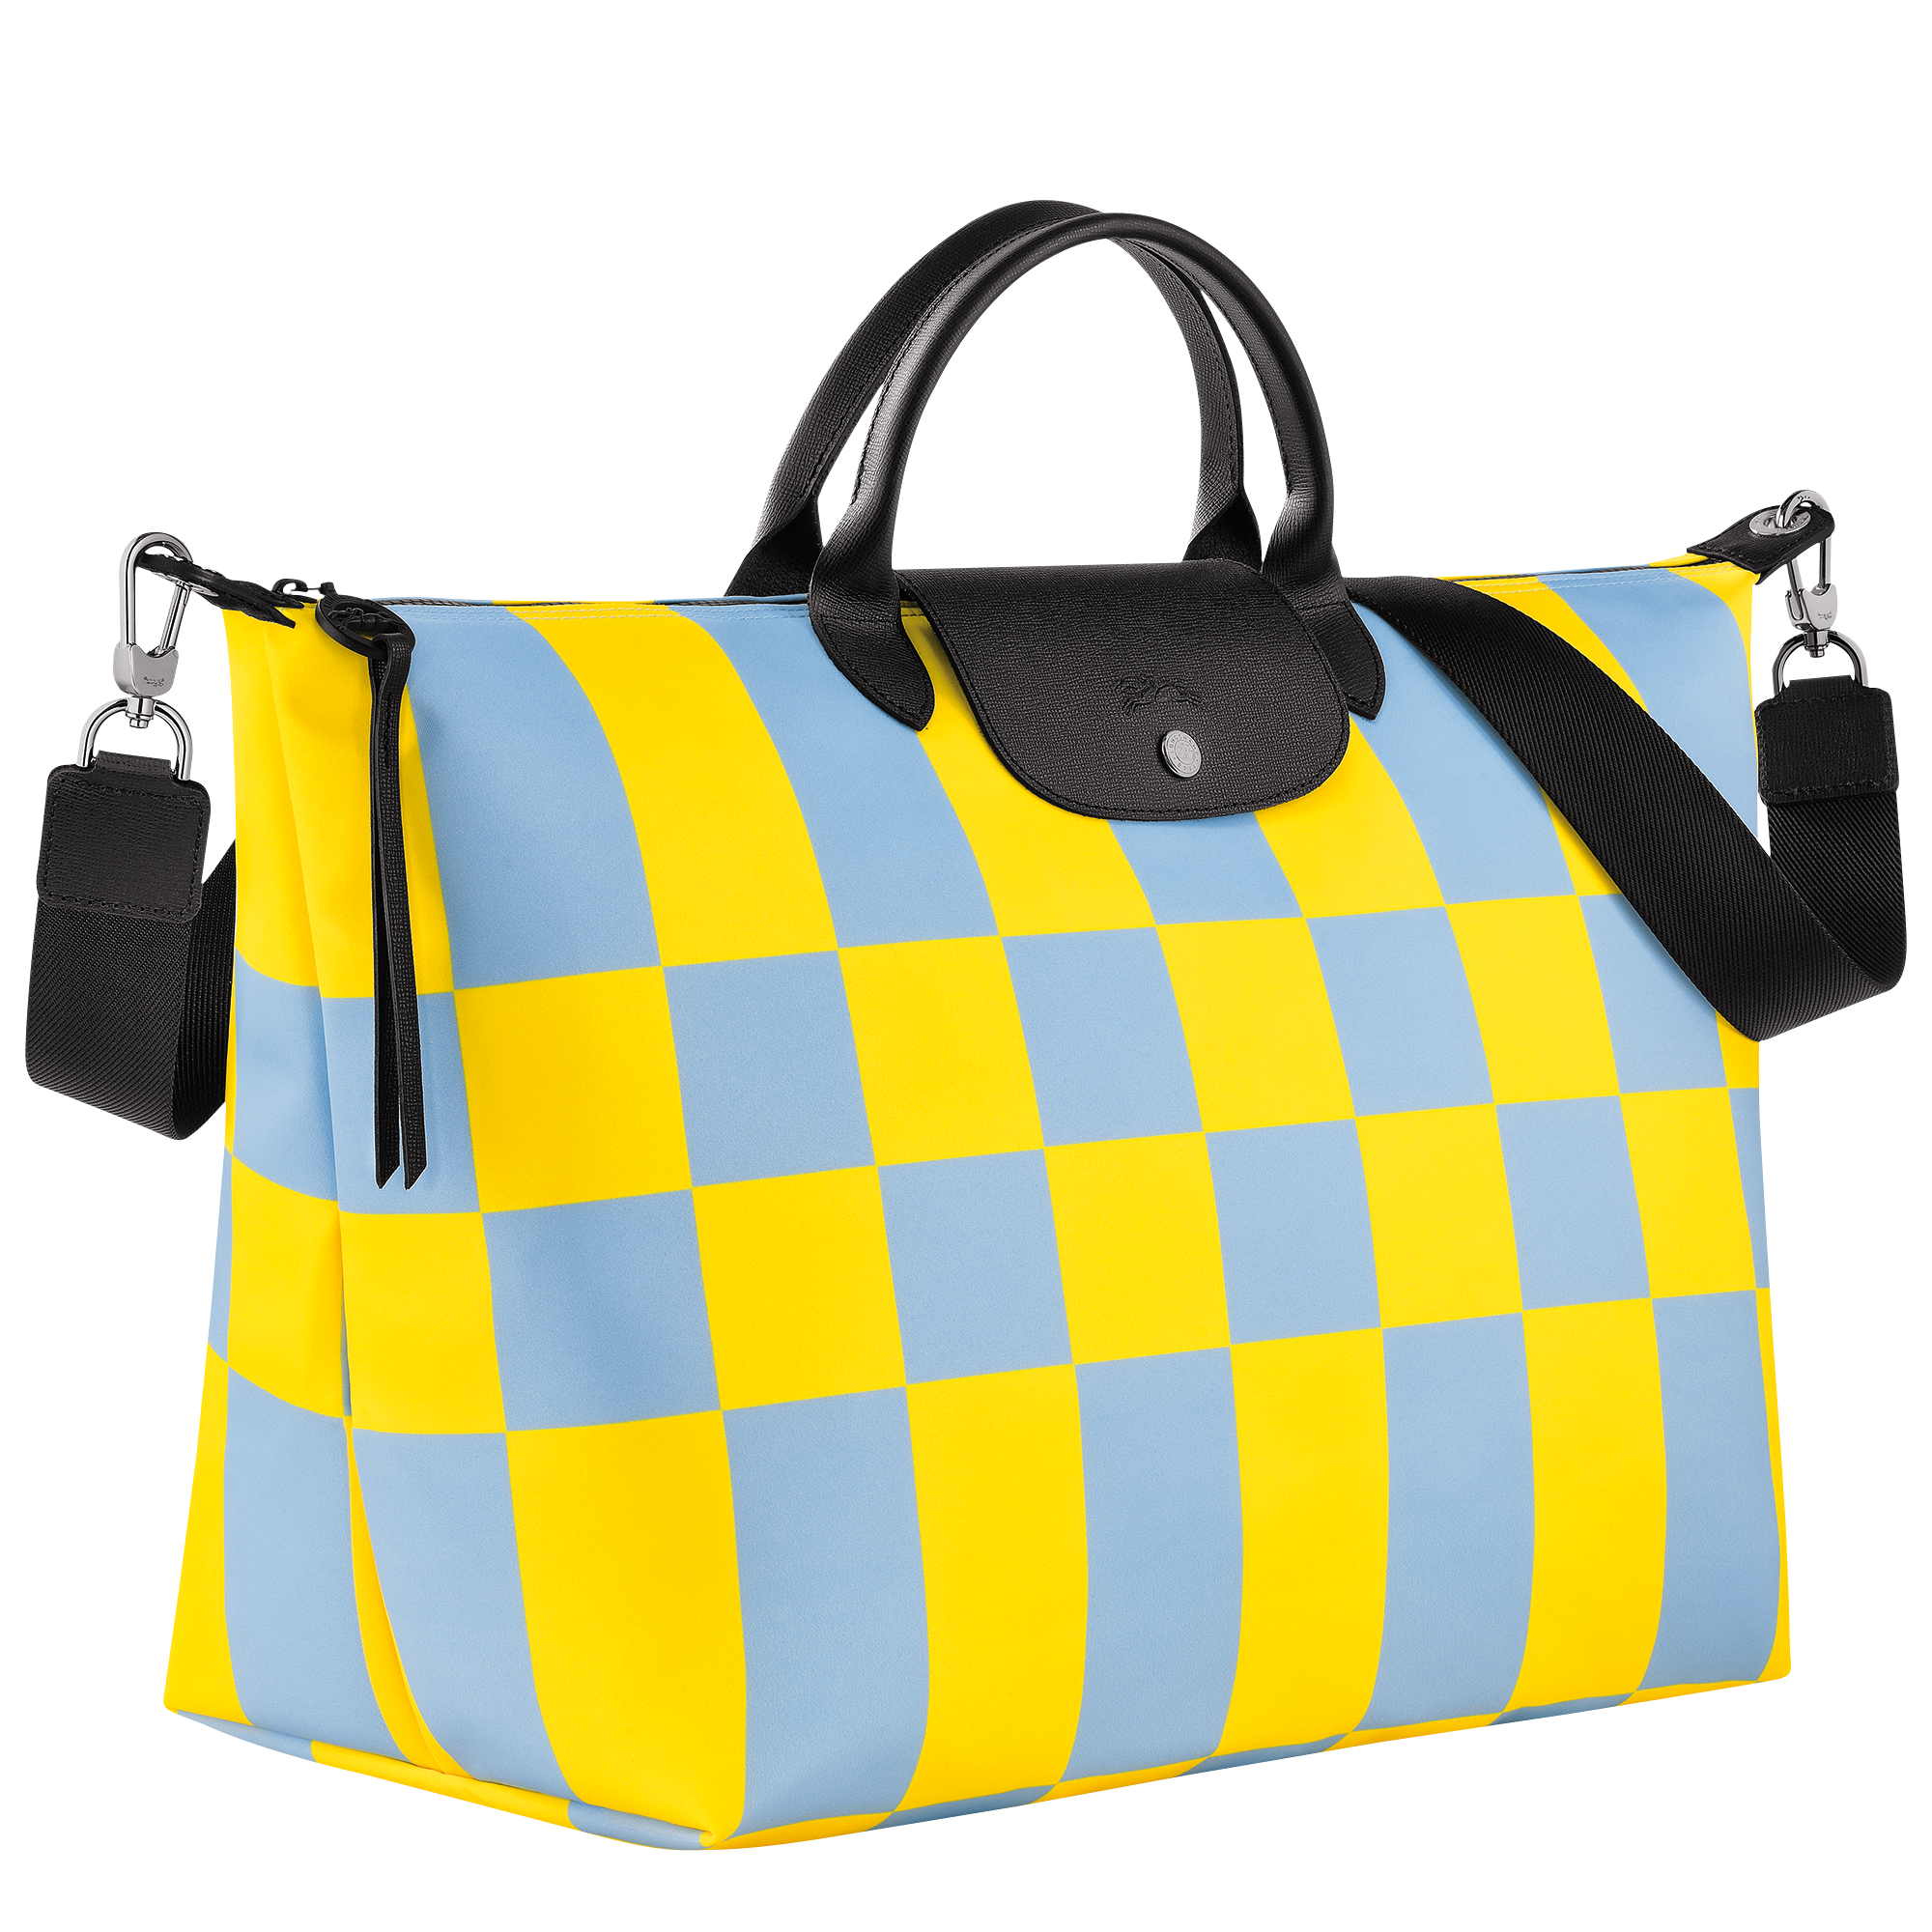 Le Pliage Collection Travel bag S, Sky Blue/Yellow